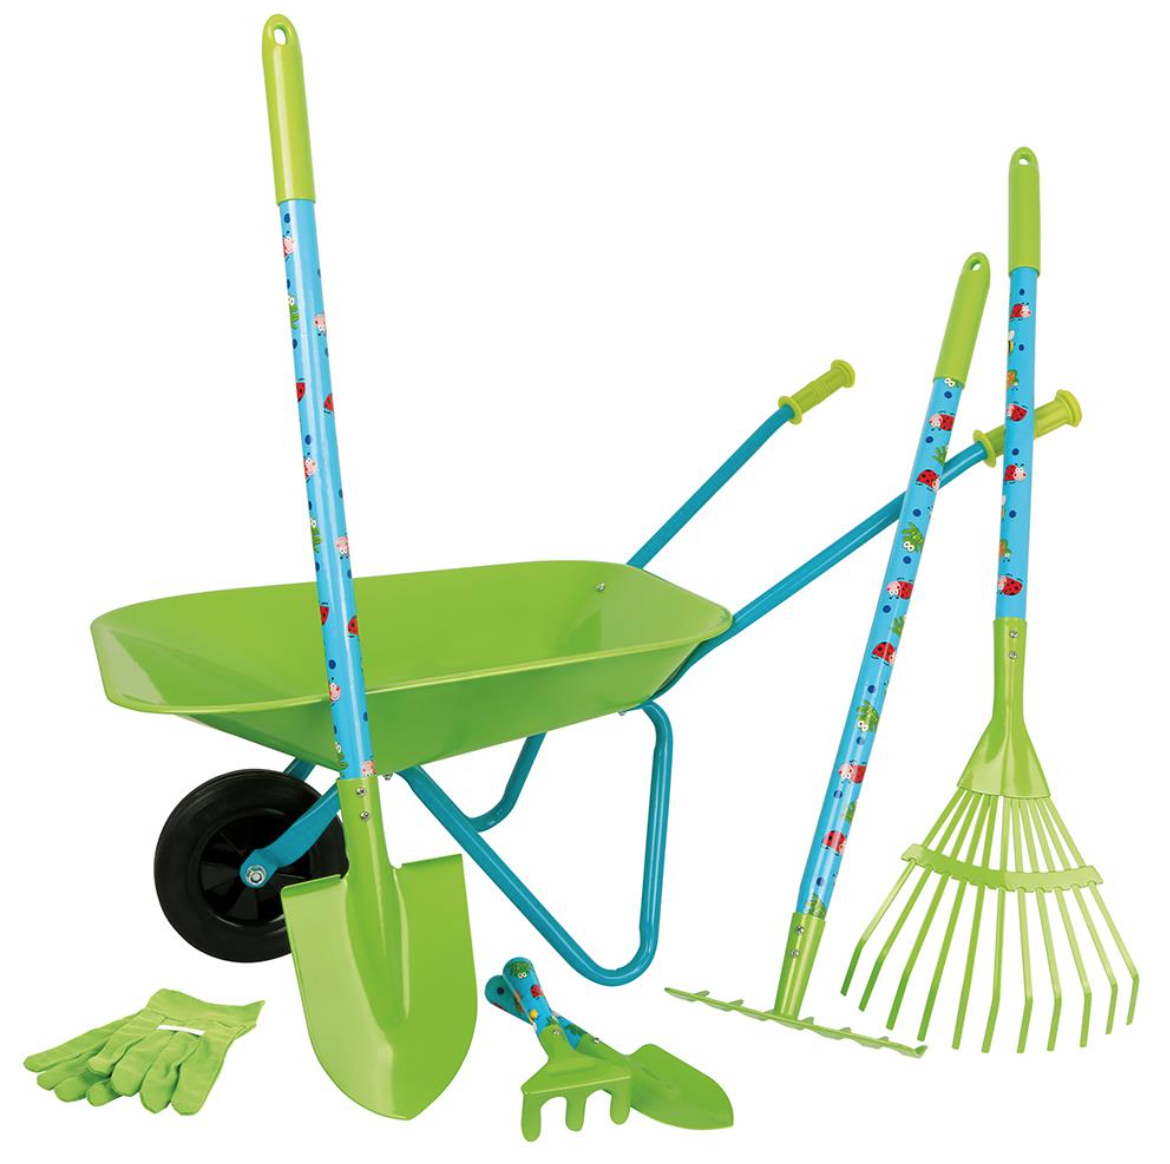 The Child's Complete Gardening Set